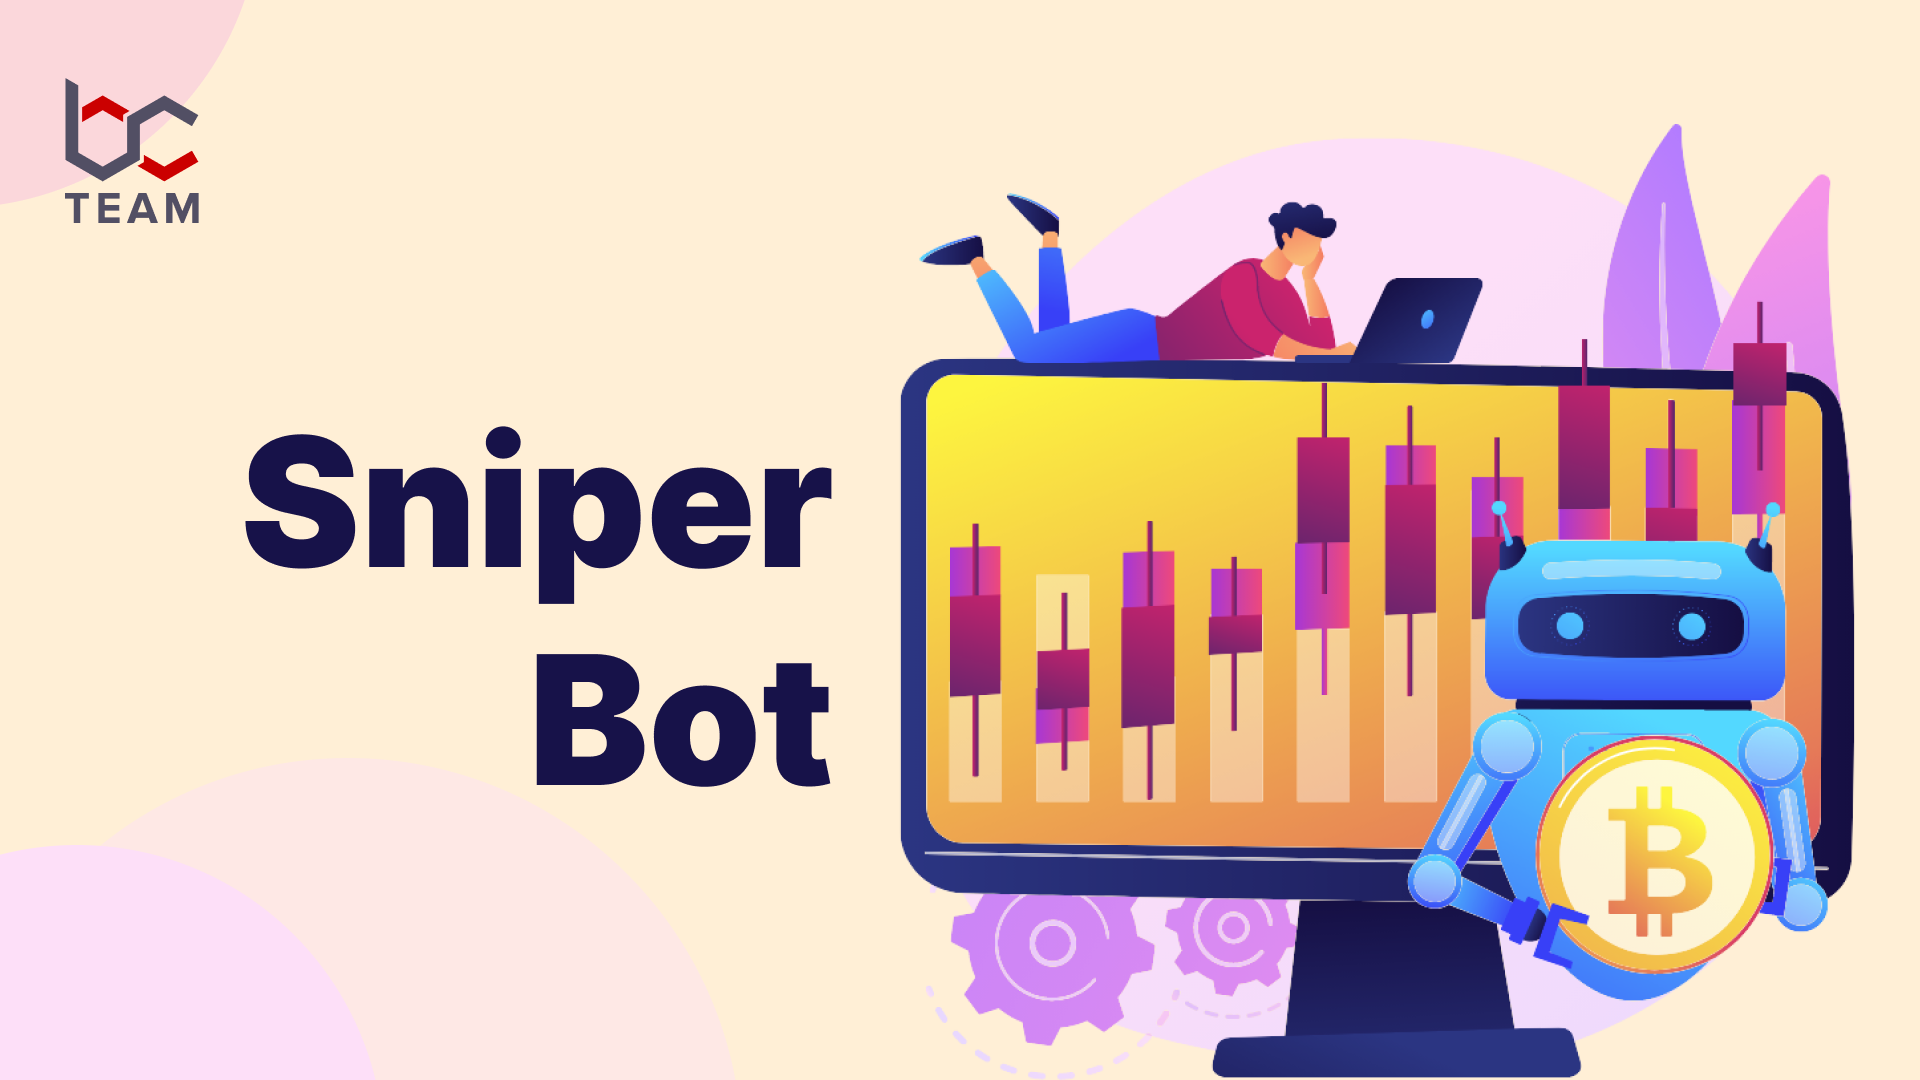 What is a Sniper Bot, and how to make money using one?